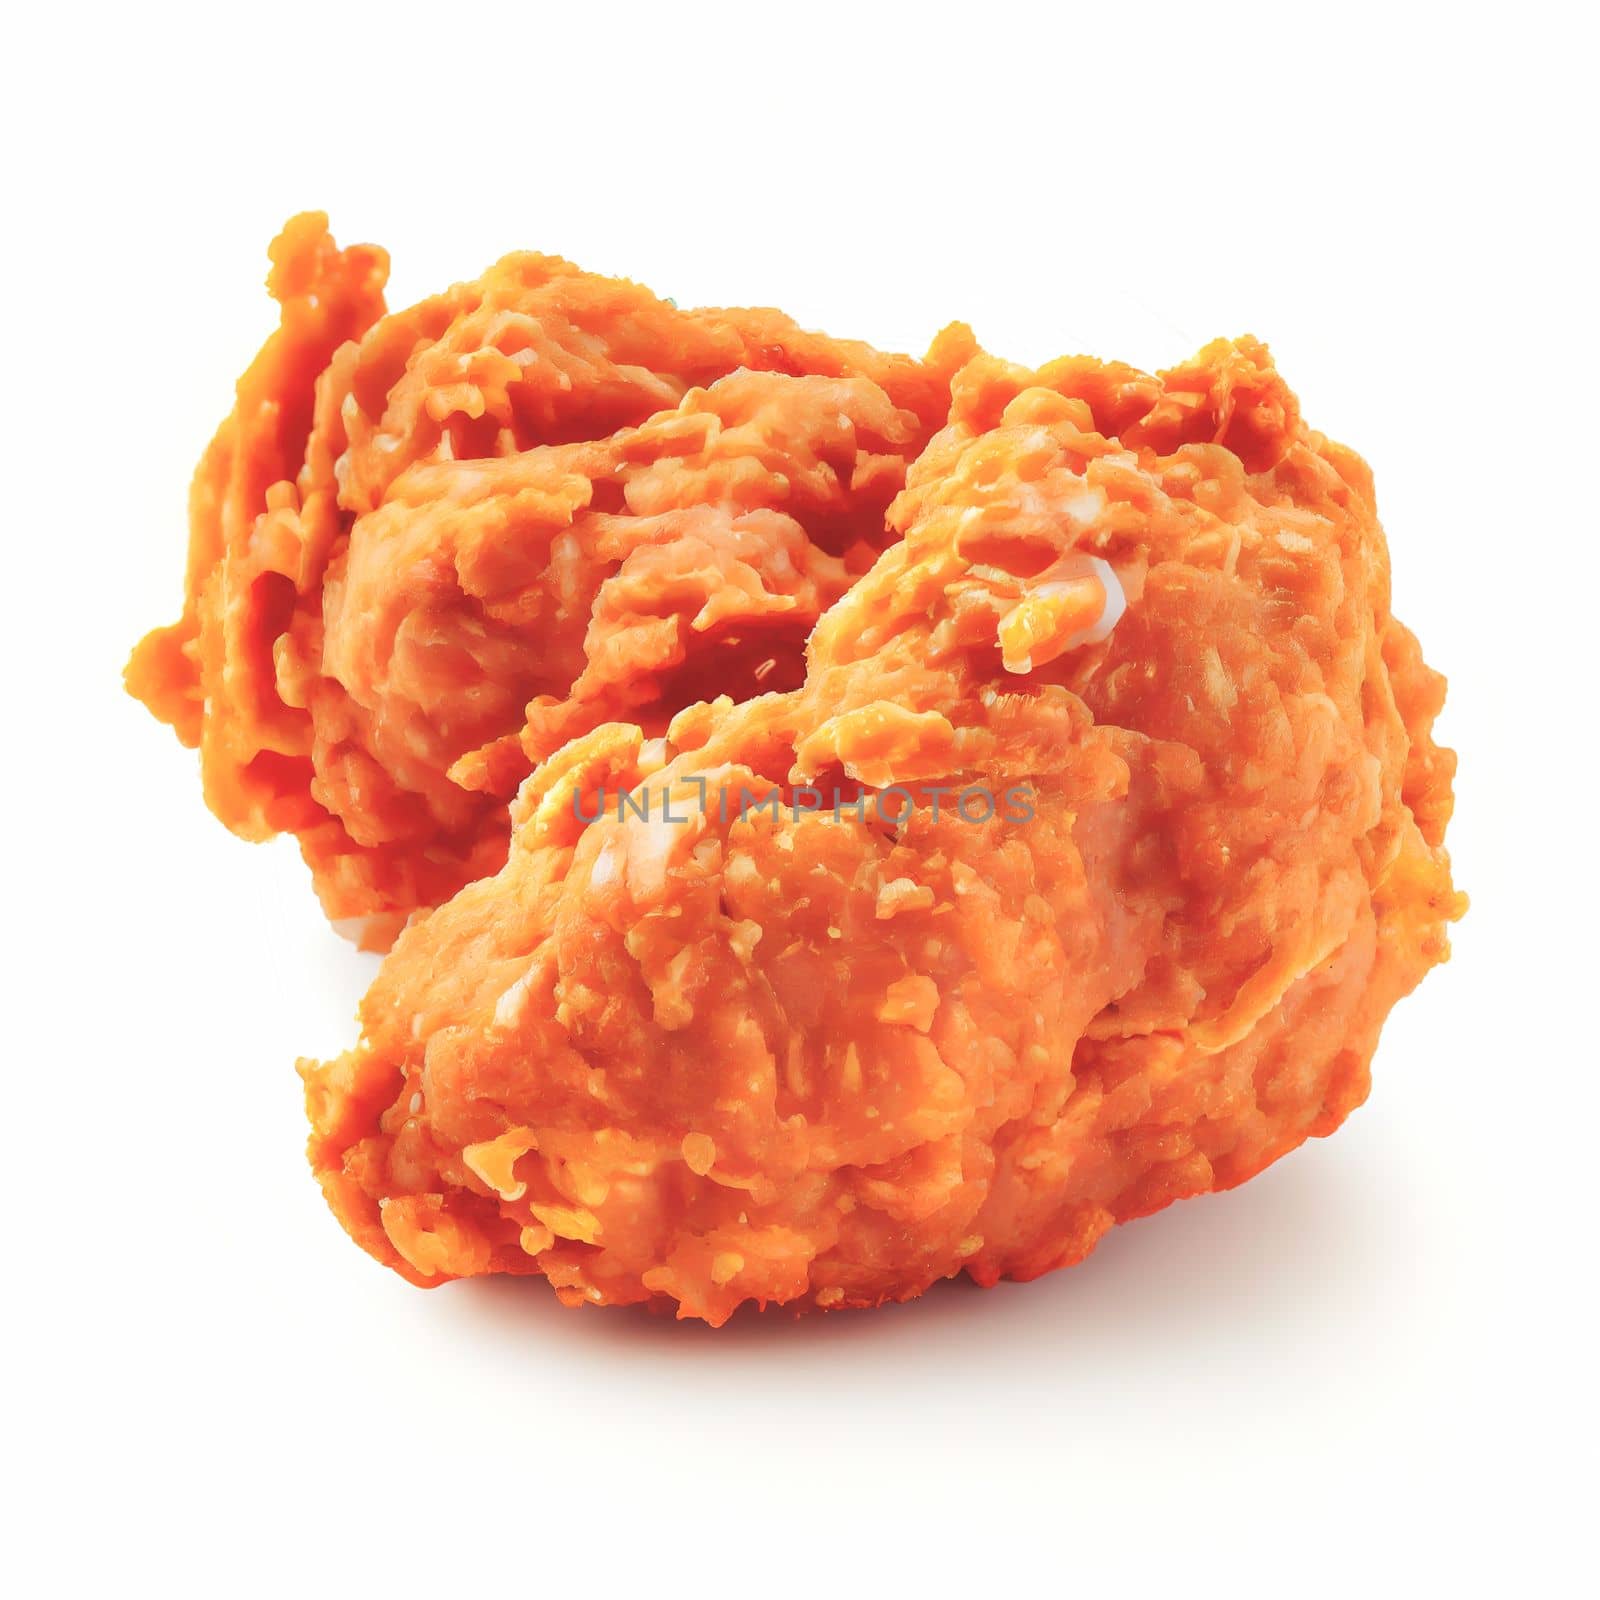 Close up shot of top view Fried Chicken isolated on white background. American dishes collection of recipes popular in USA. These comfort foods are popular at picnics, barbecues, and sporting events.